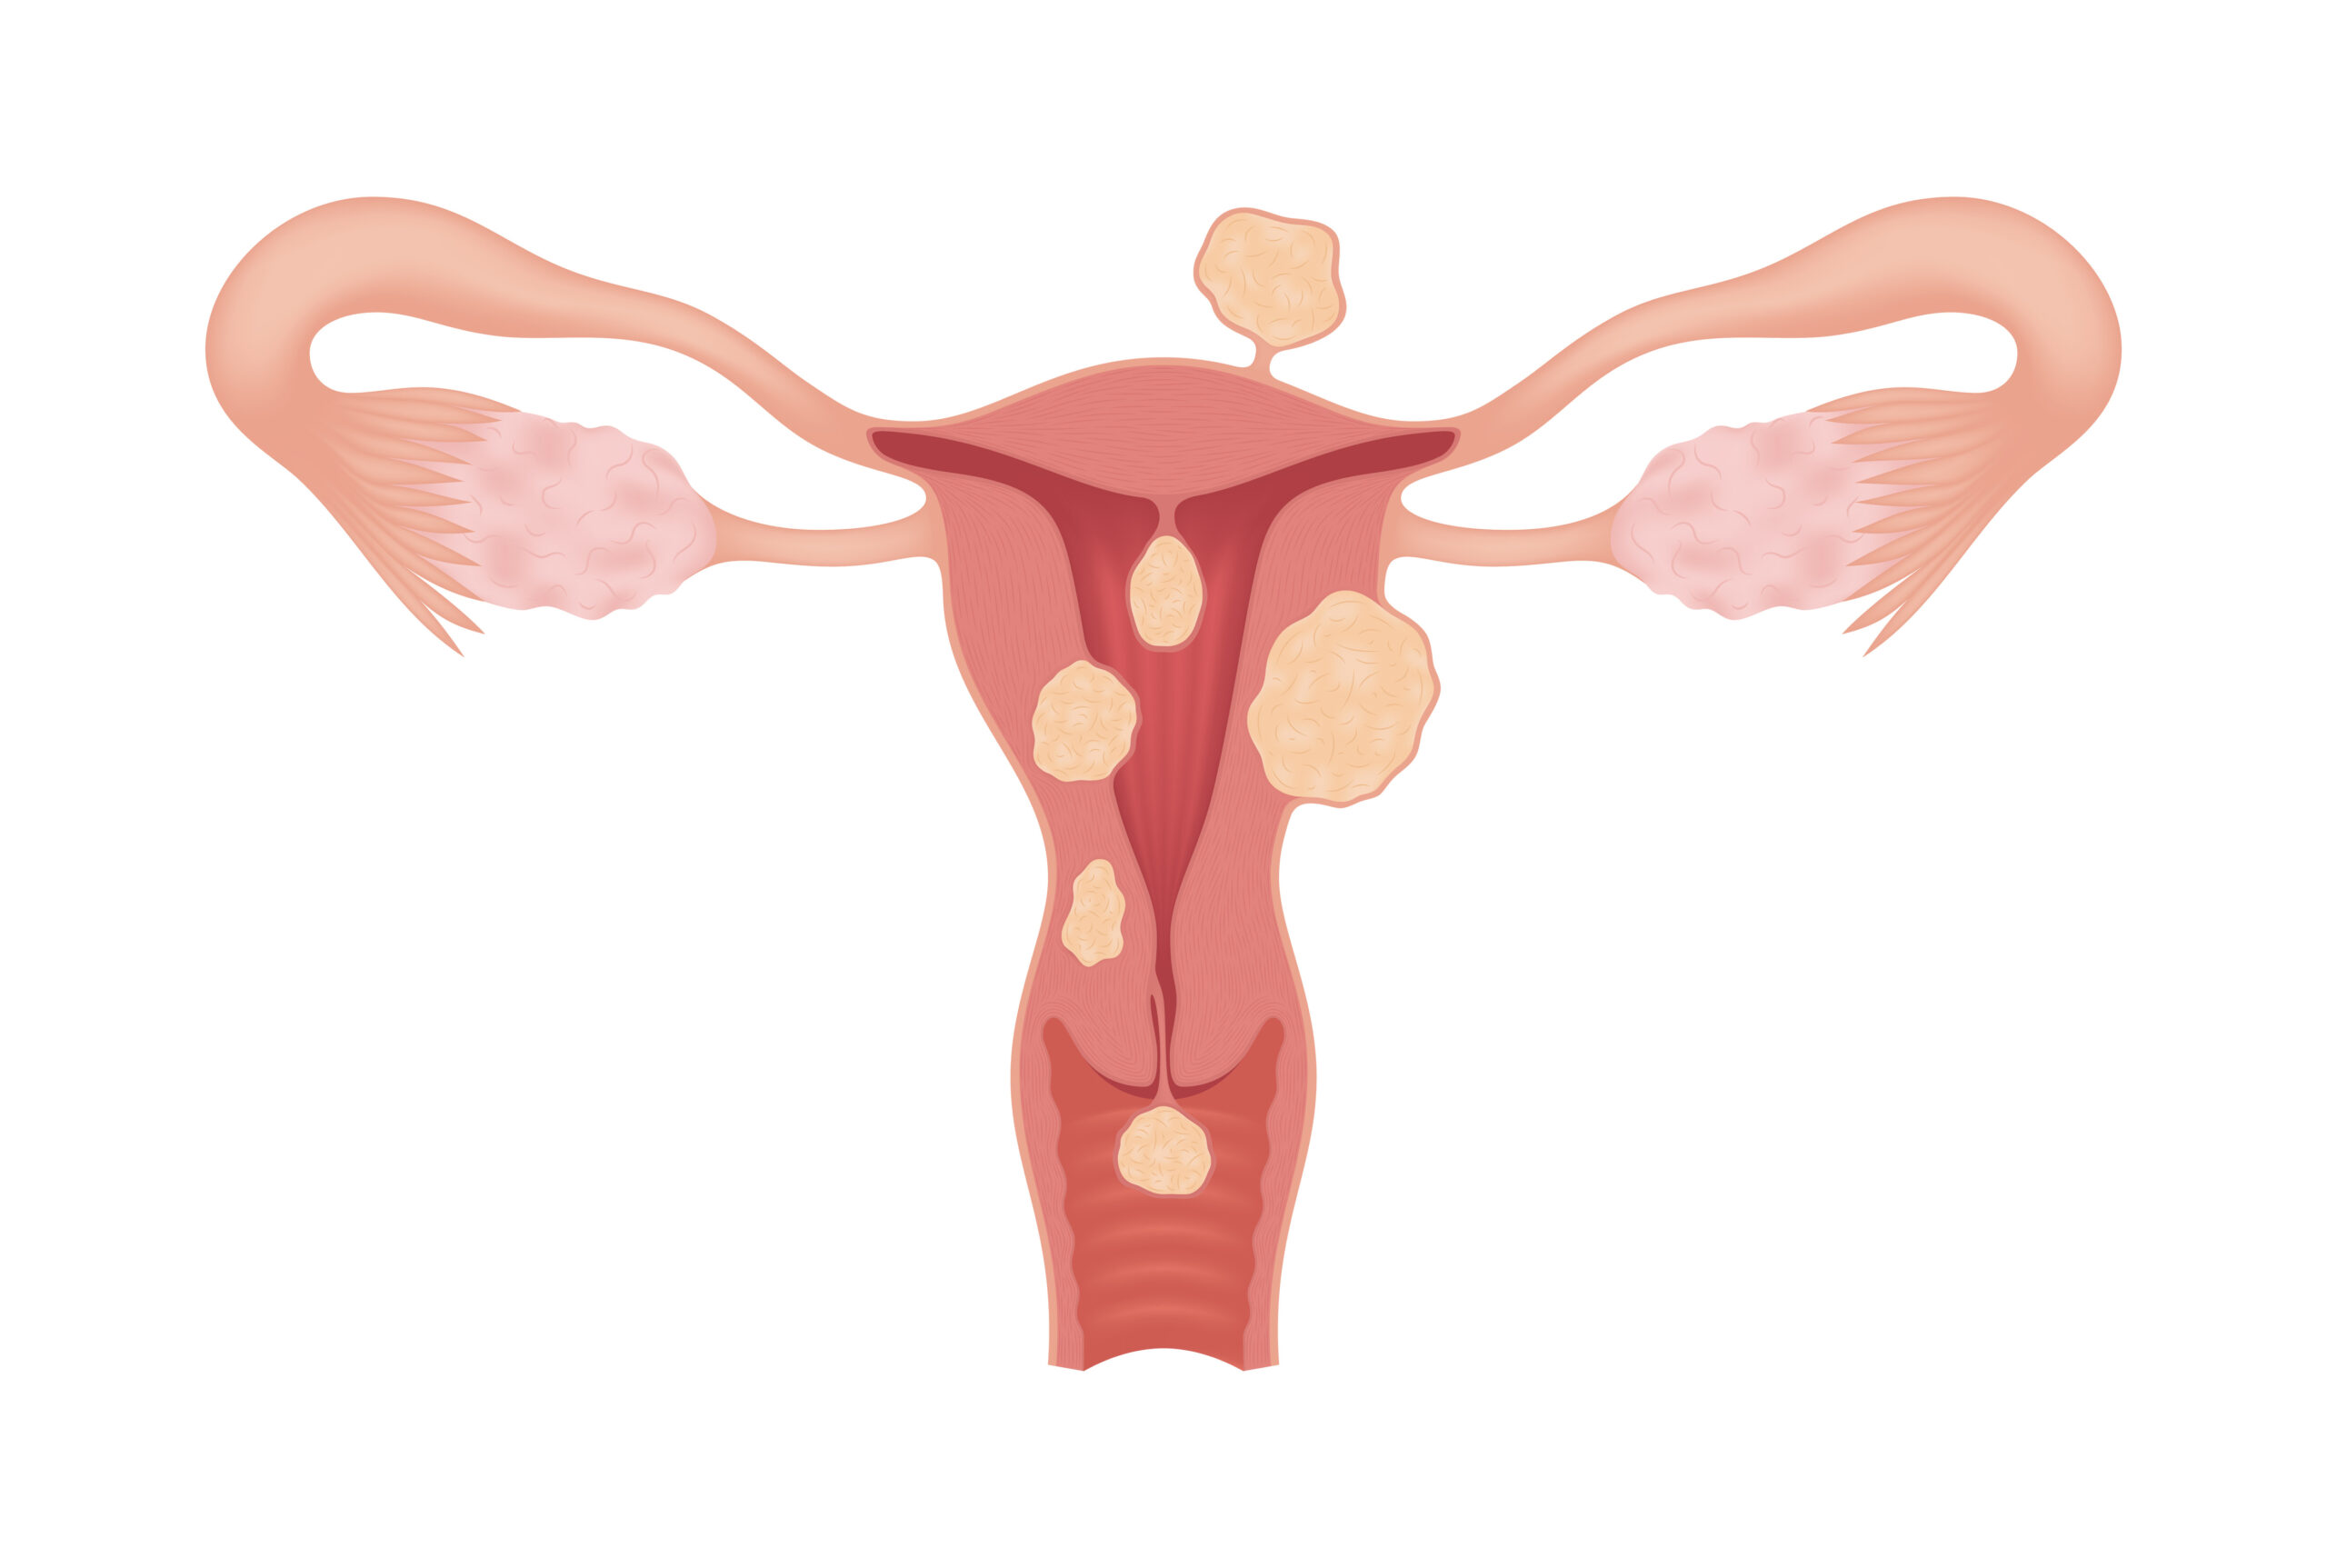 Sick female reproductive system with various types of myomas isolated on whte background. Realistic drawing showing the internal organs. Frontal view in a cut.